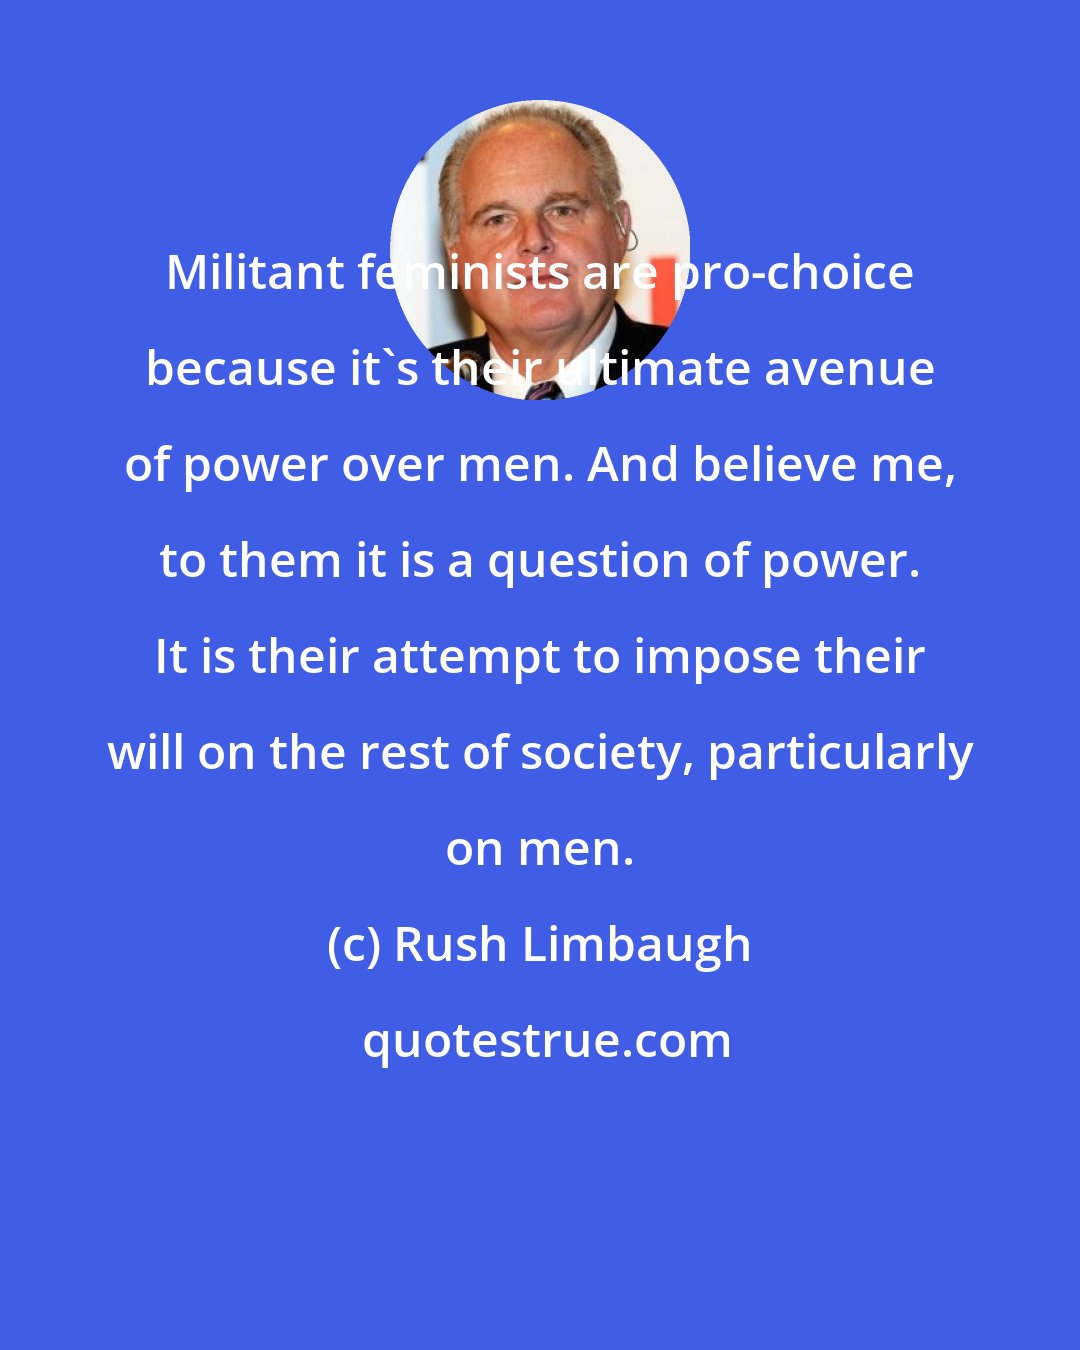 Rush Limbaugh: Militant feminists are pro-choice because it's their ultimate avenue of power over men. And believe me, to them it is a question of power. It is their attempt to impose their will on the rest of society, particularly on men.